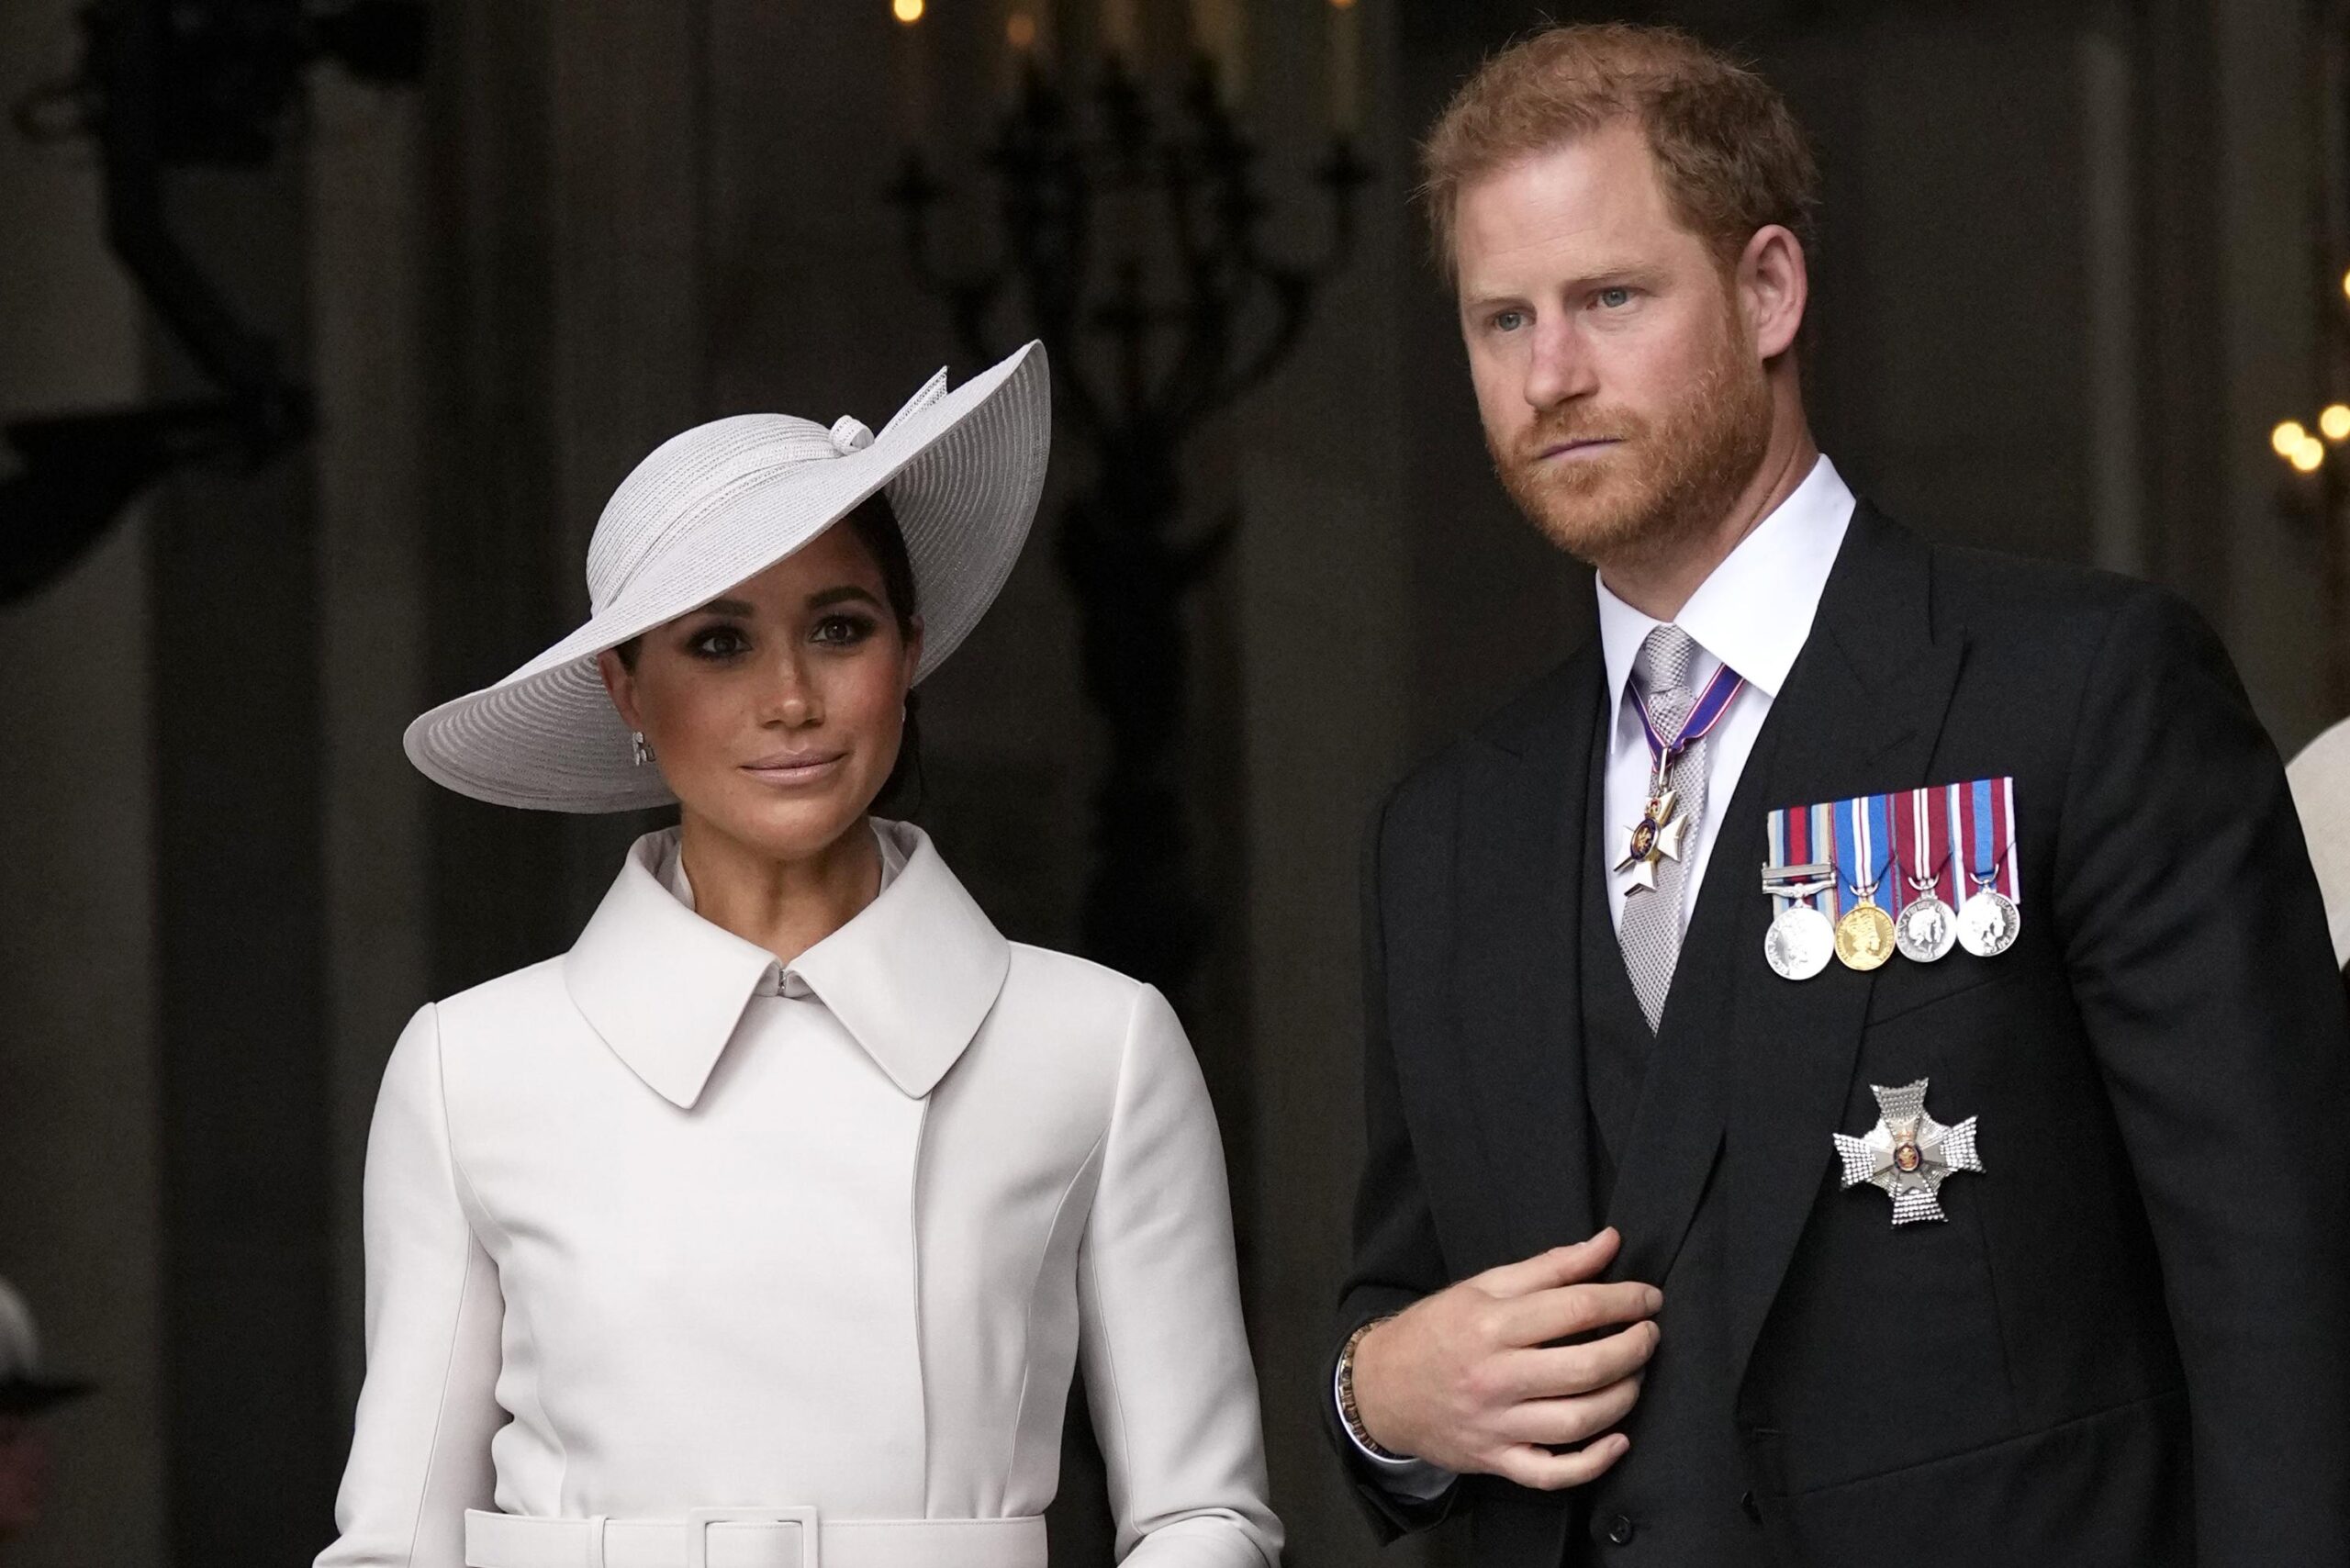 Analyzing Meghan Markle's Pursuits: Following Her Own Interests or Serving The Monarchy?